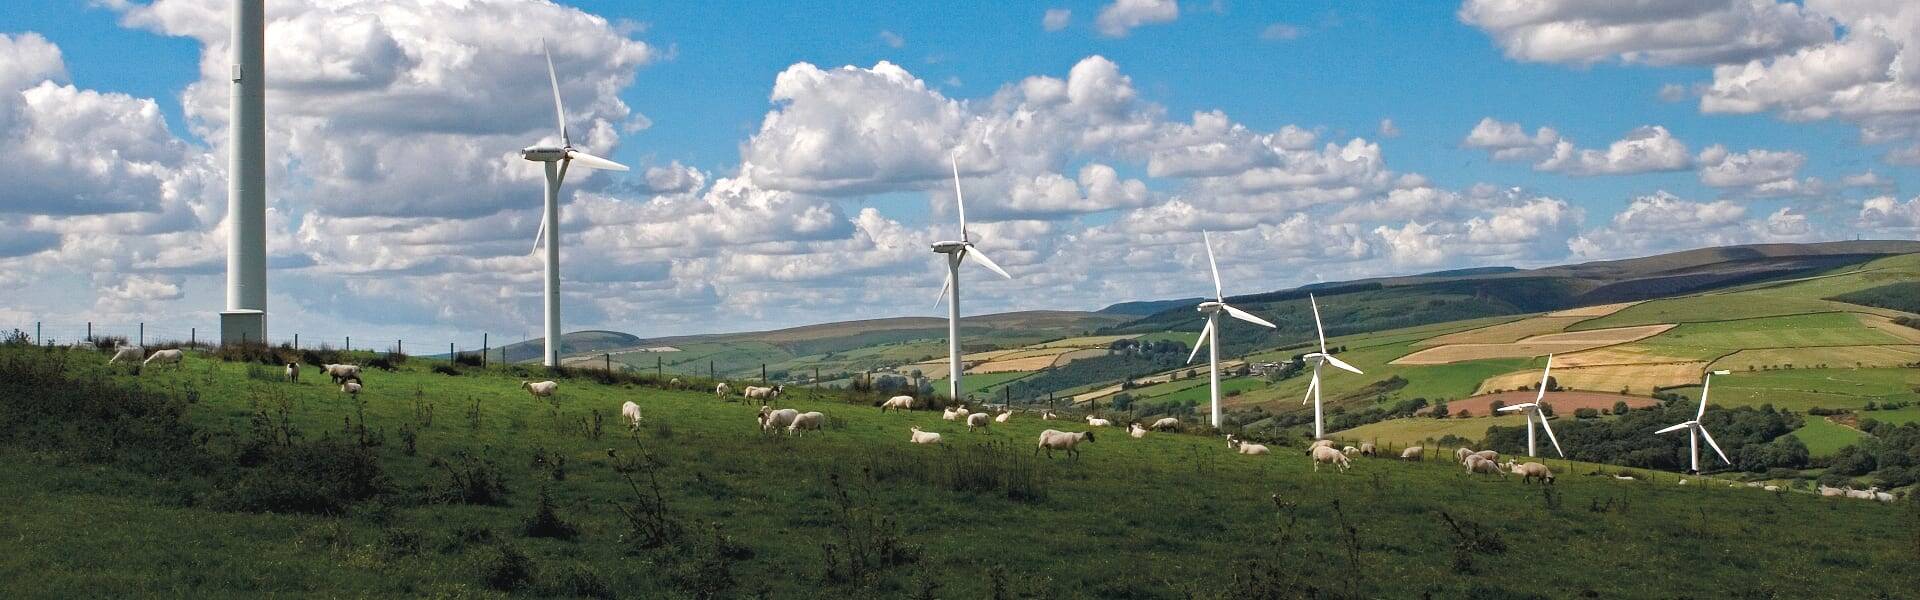 Over 7GW of onshore windfarms will miss RO grace period, says Rudd